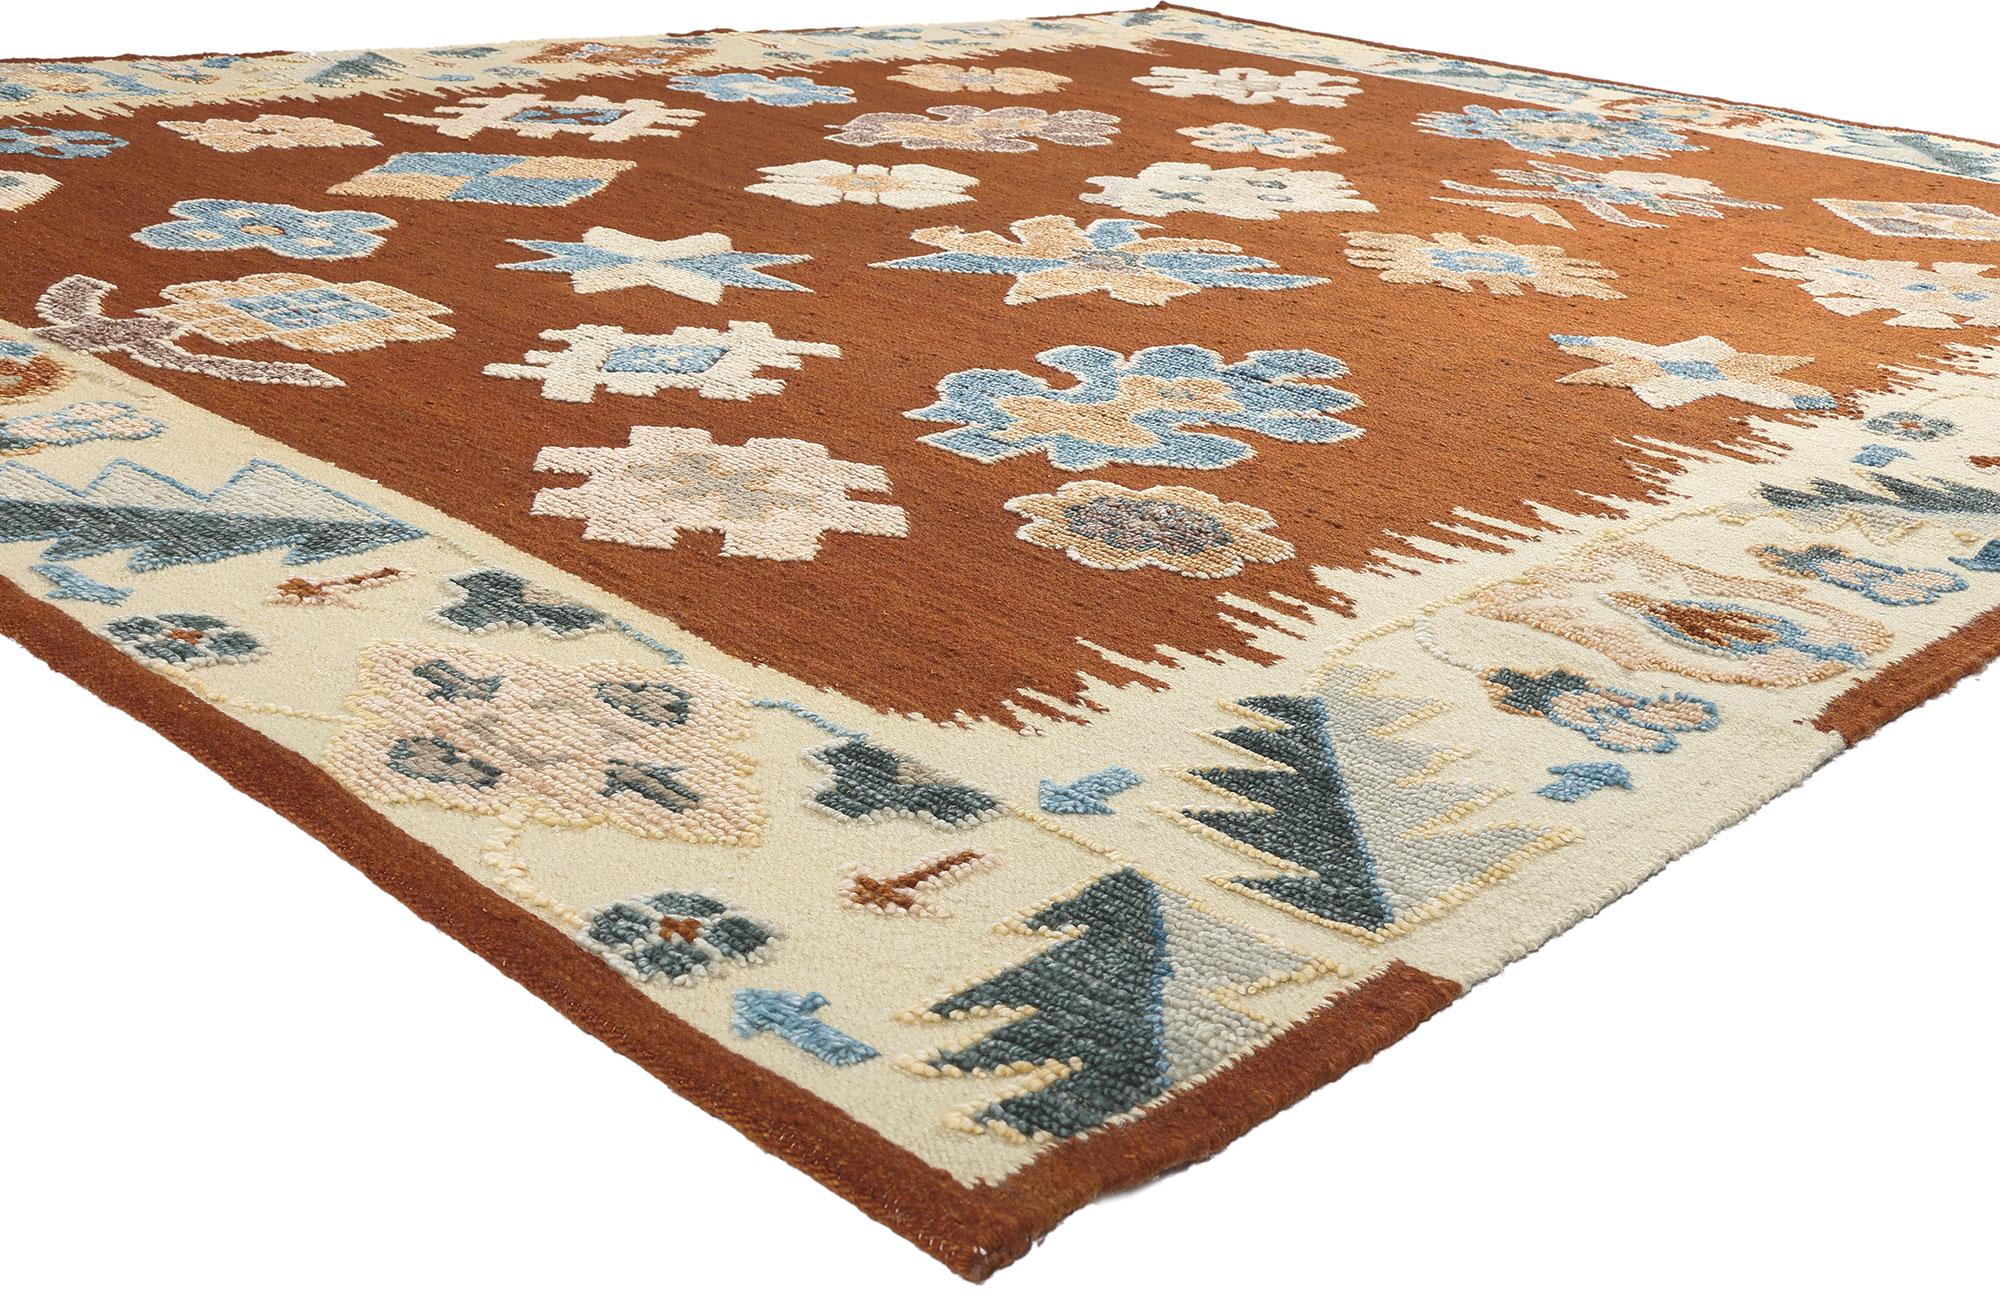 30894 New Modern Style Oushak High-Low Rug, 09'07 x 12'03.
Showcasing a raised design with incredible detail and texture, this Oushak high-low rug is a captivating vision of woven beauty. The geometric pattern and earthy colorway woven into this